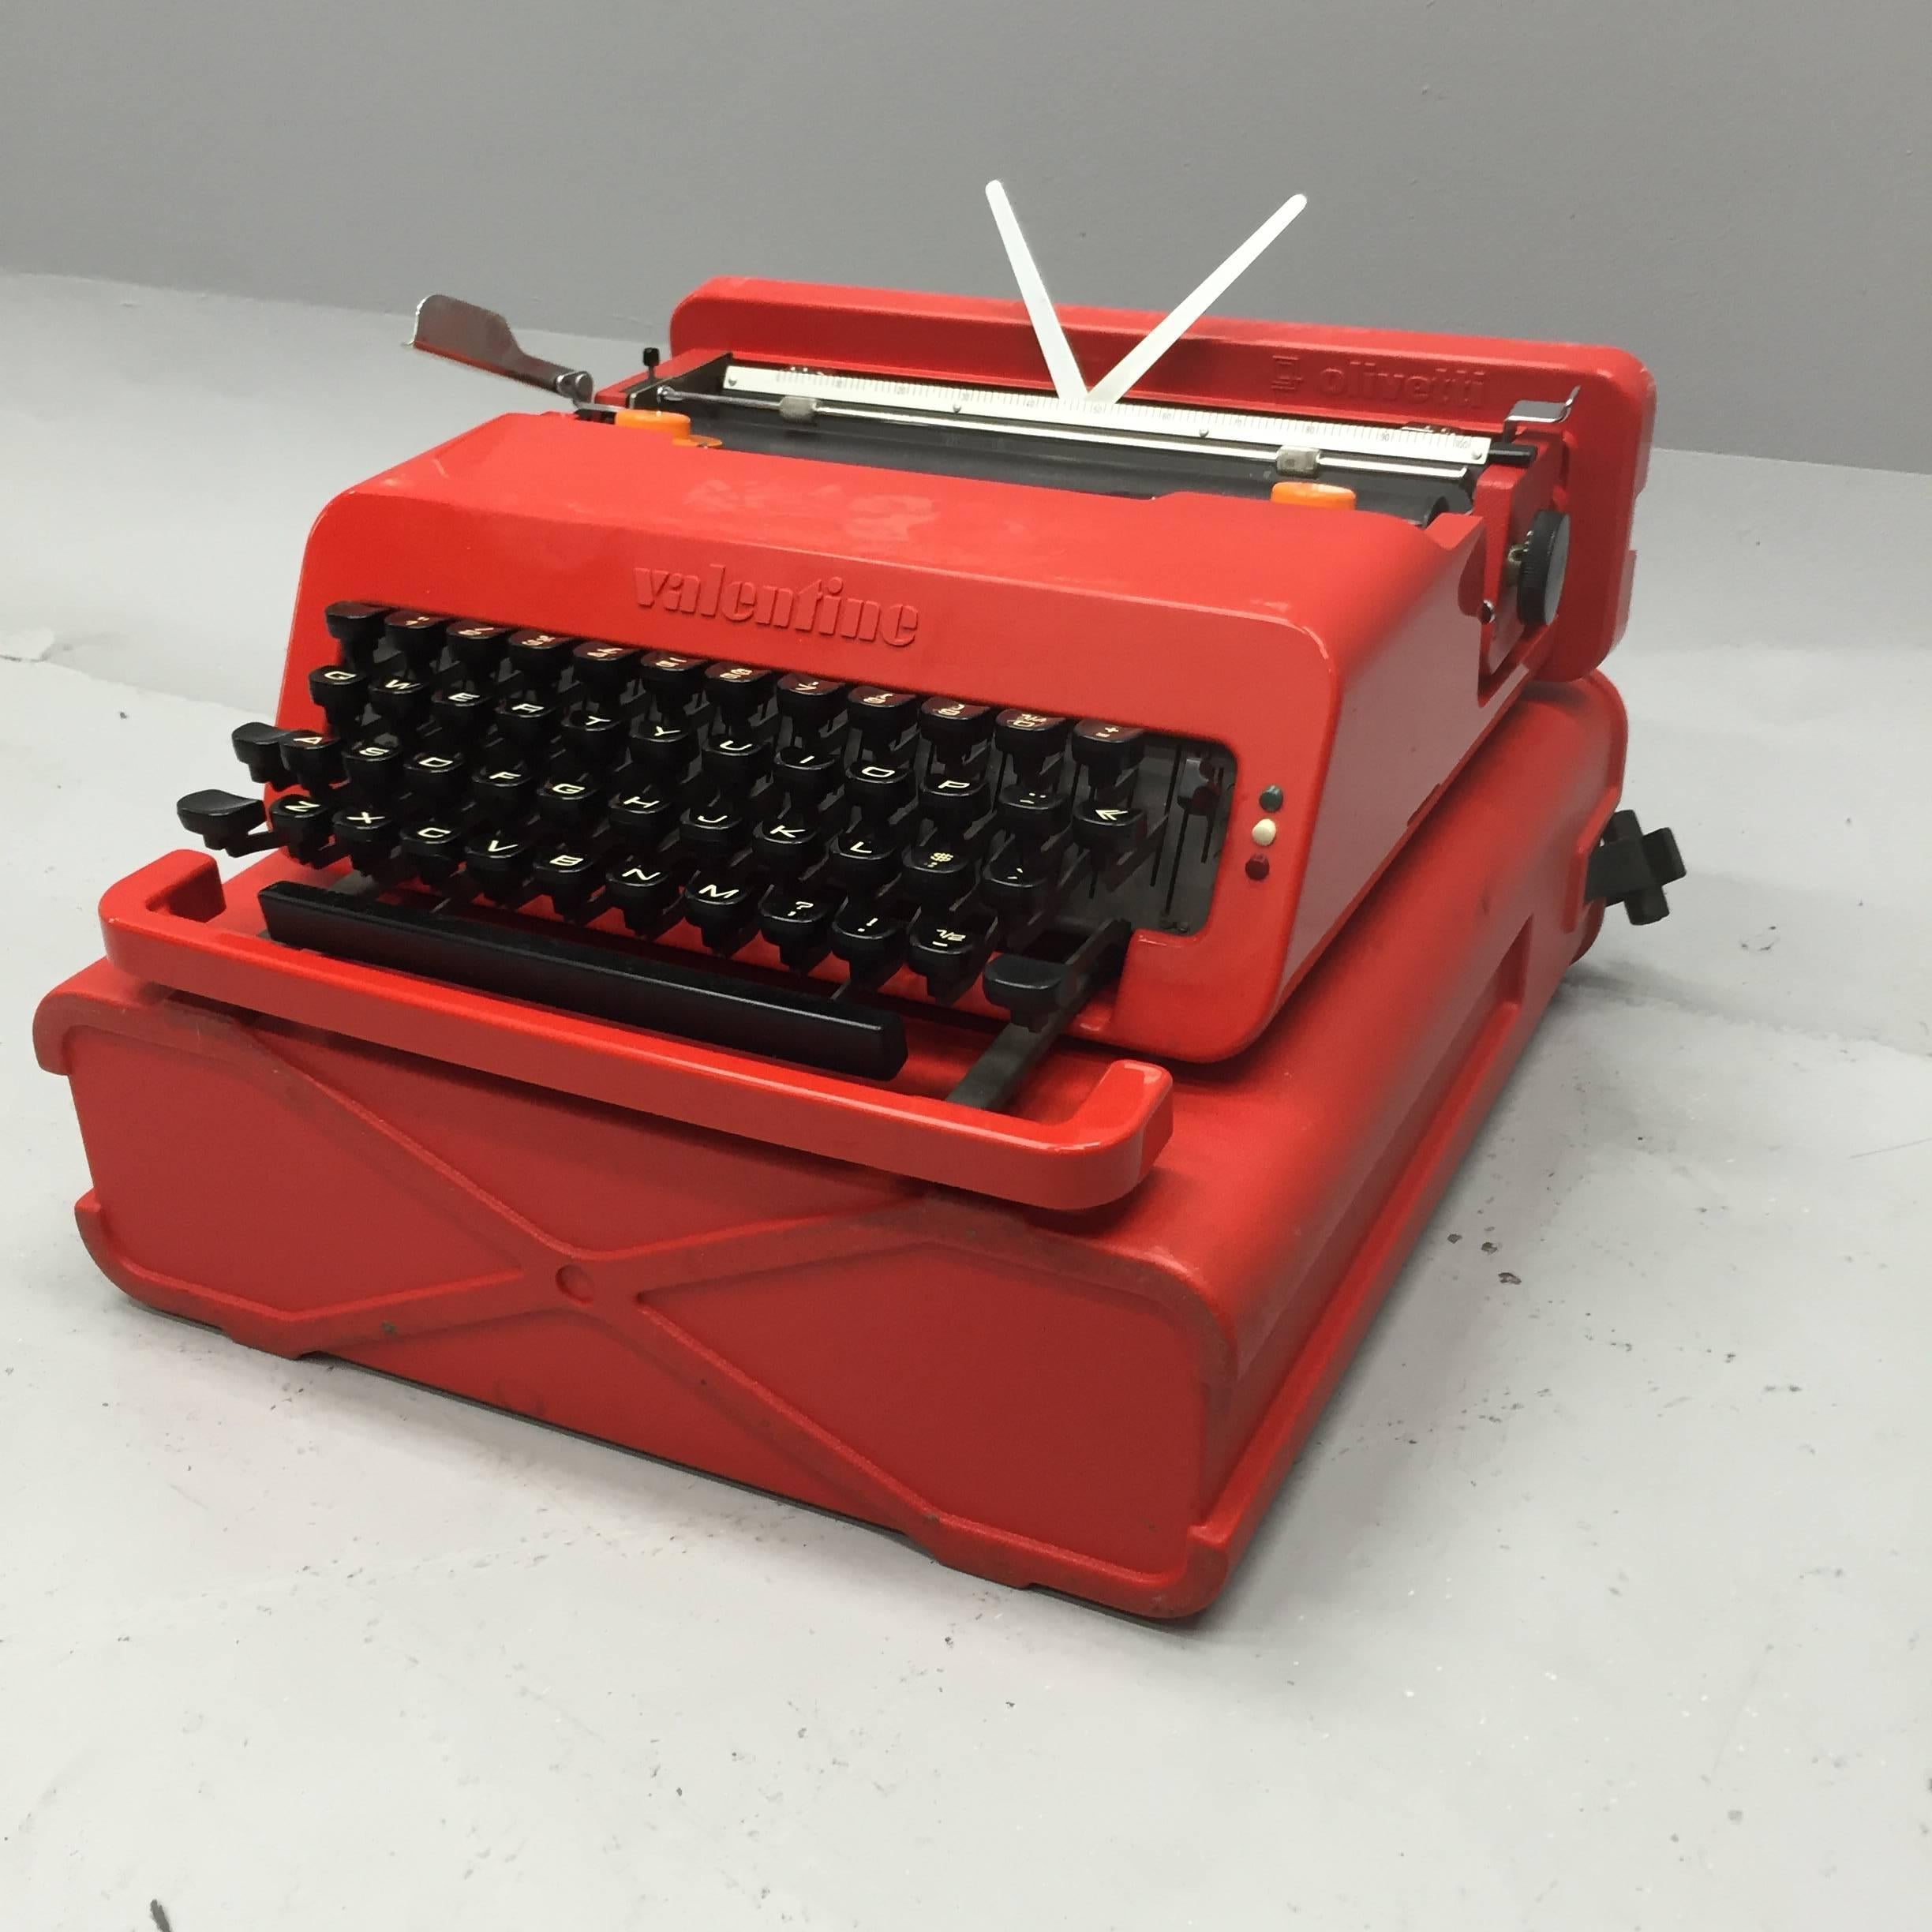 This is the iMac of it's day: the bright red Olivetti Valentine typewriter.
 
Designed by Ettore Sottsass and Perry King, the typewriter is housed in the permanent collection of the MoMA as an iconic example of Pop Art design. It is one of the